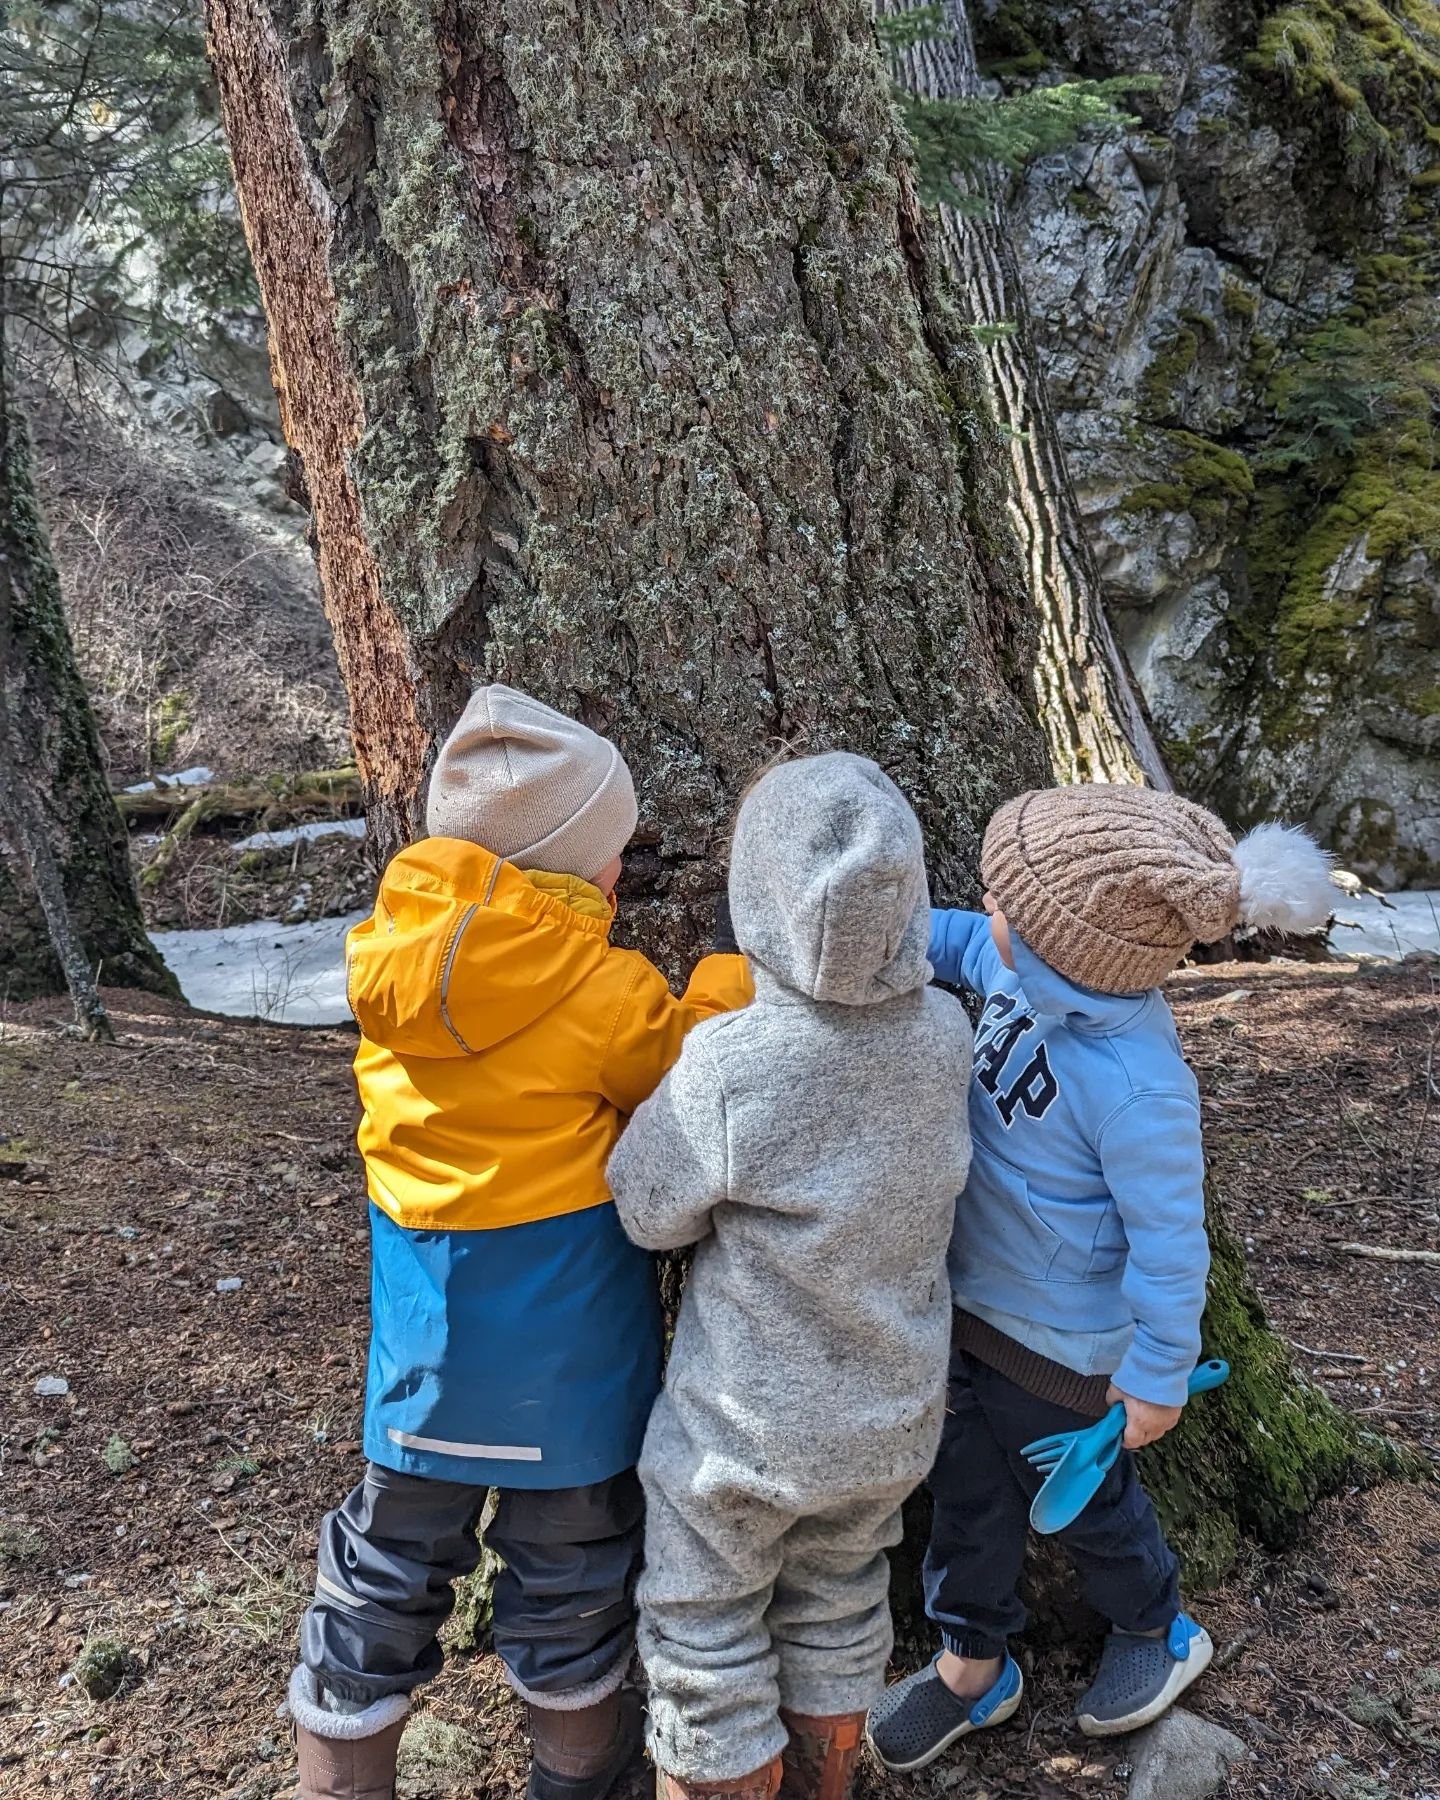 1st week of spring forest school 🌱 full of wonder, curiosity, getting into the dirt, using tools, assessing risk, going for adventures down the path, creating, problem-solving, meeting new friends, and so much more! 
#forestschool #playislearning #r